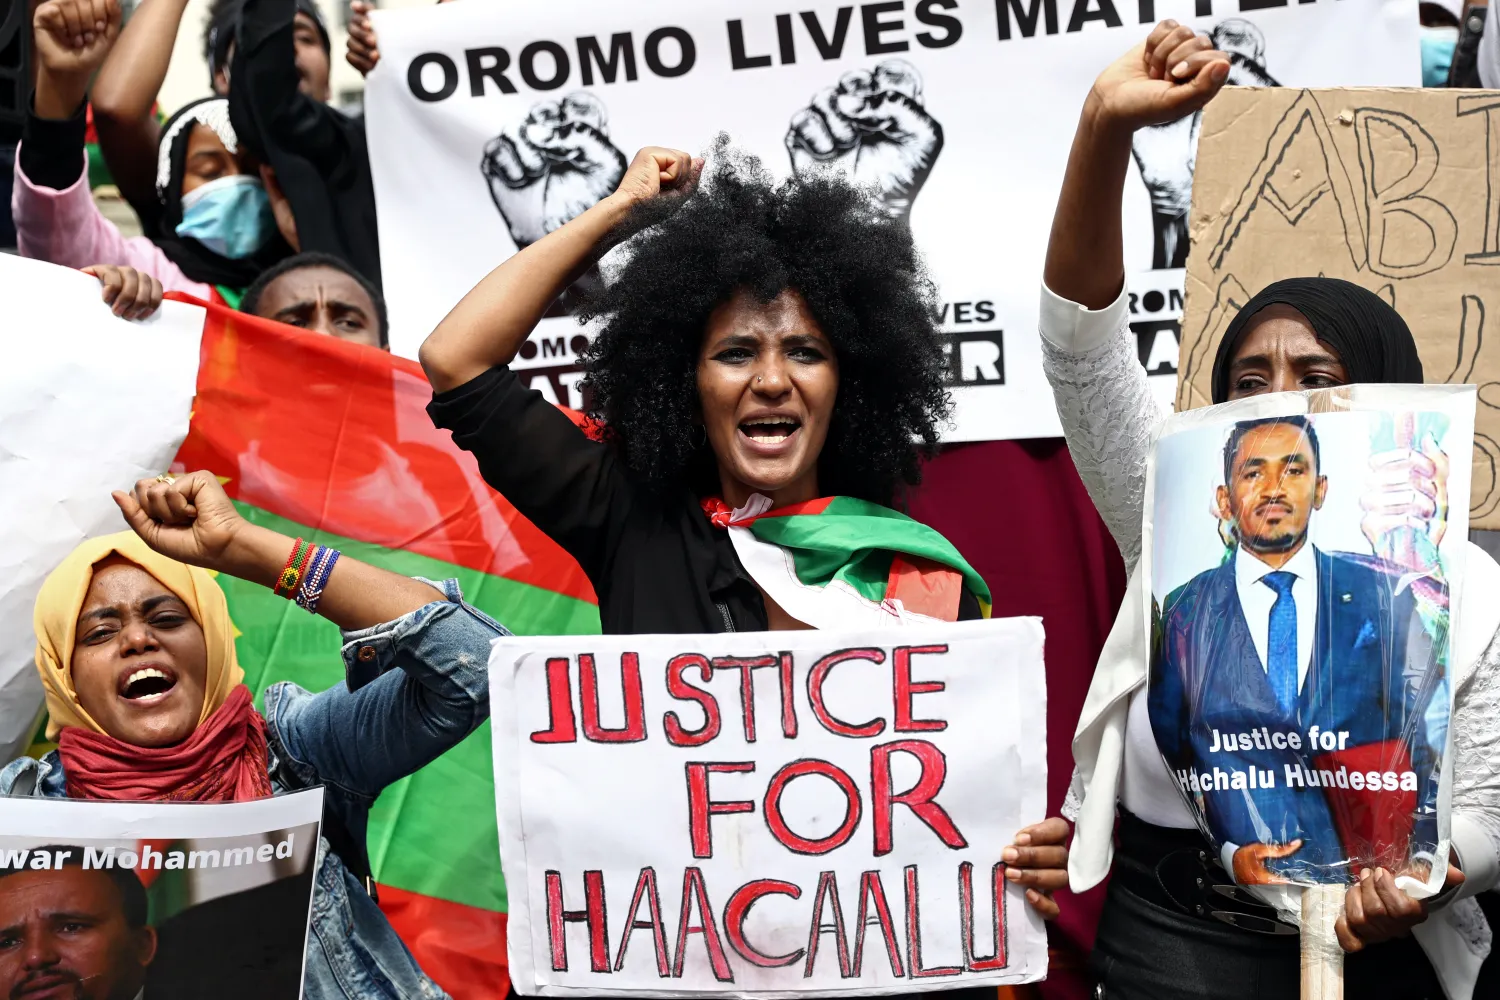 Oromo community in UK hold a protest demanding justice for Hachalu Hundessa following his assassination on June 29, 2020. 